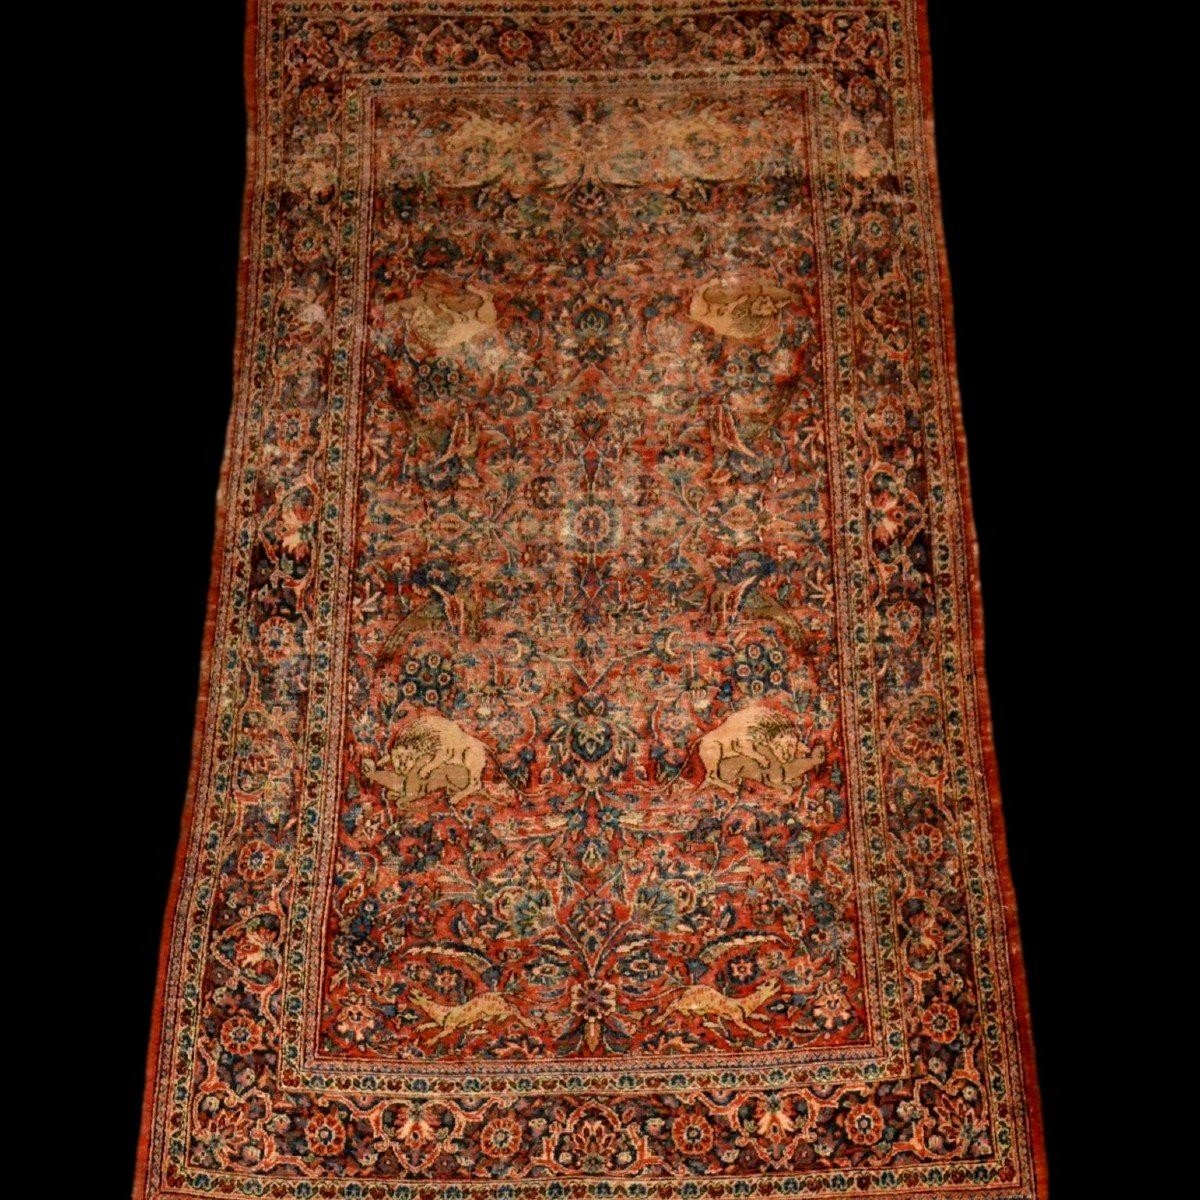 Antique Isfahan Rug With Hunting Scene, 124 X 203 Cm, Hand-knotted Wool In Persia In The 19th